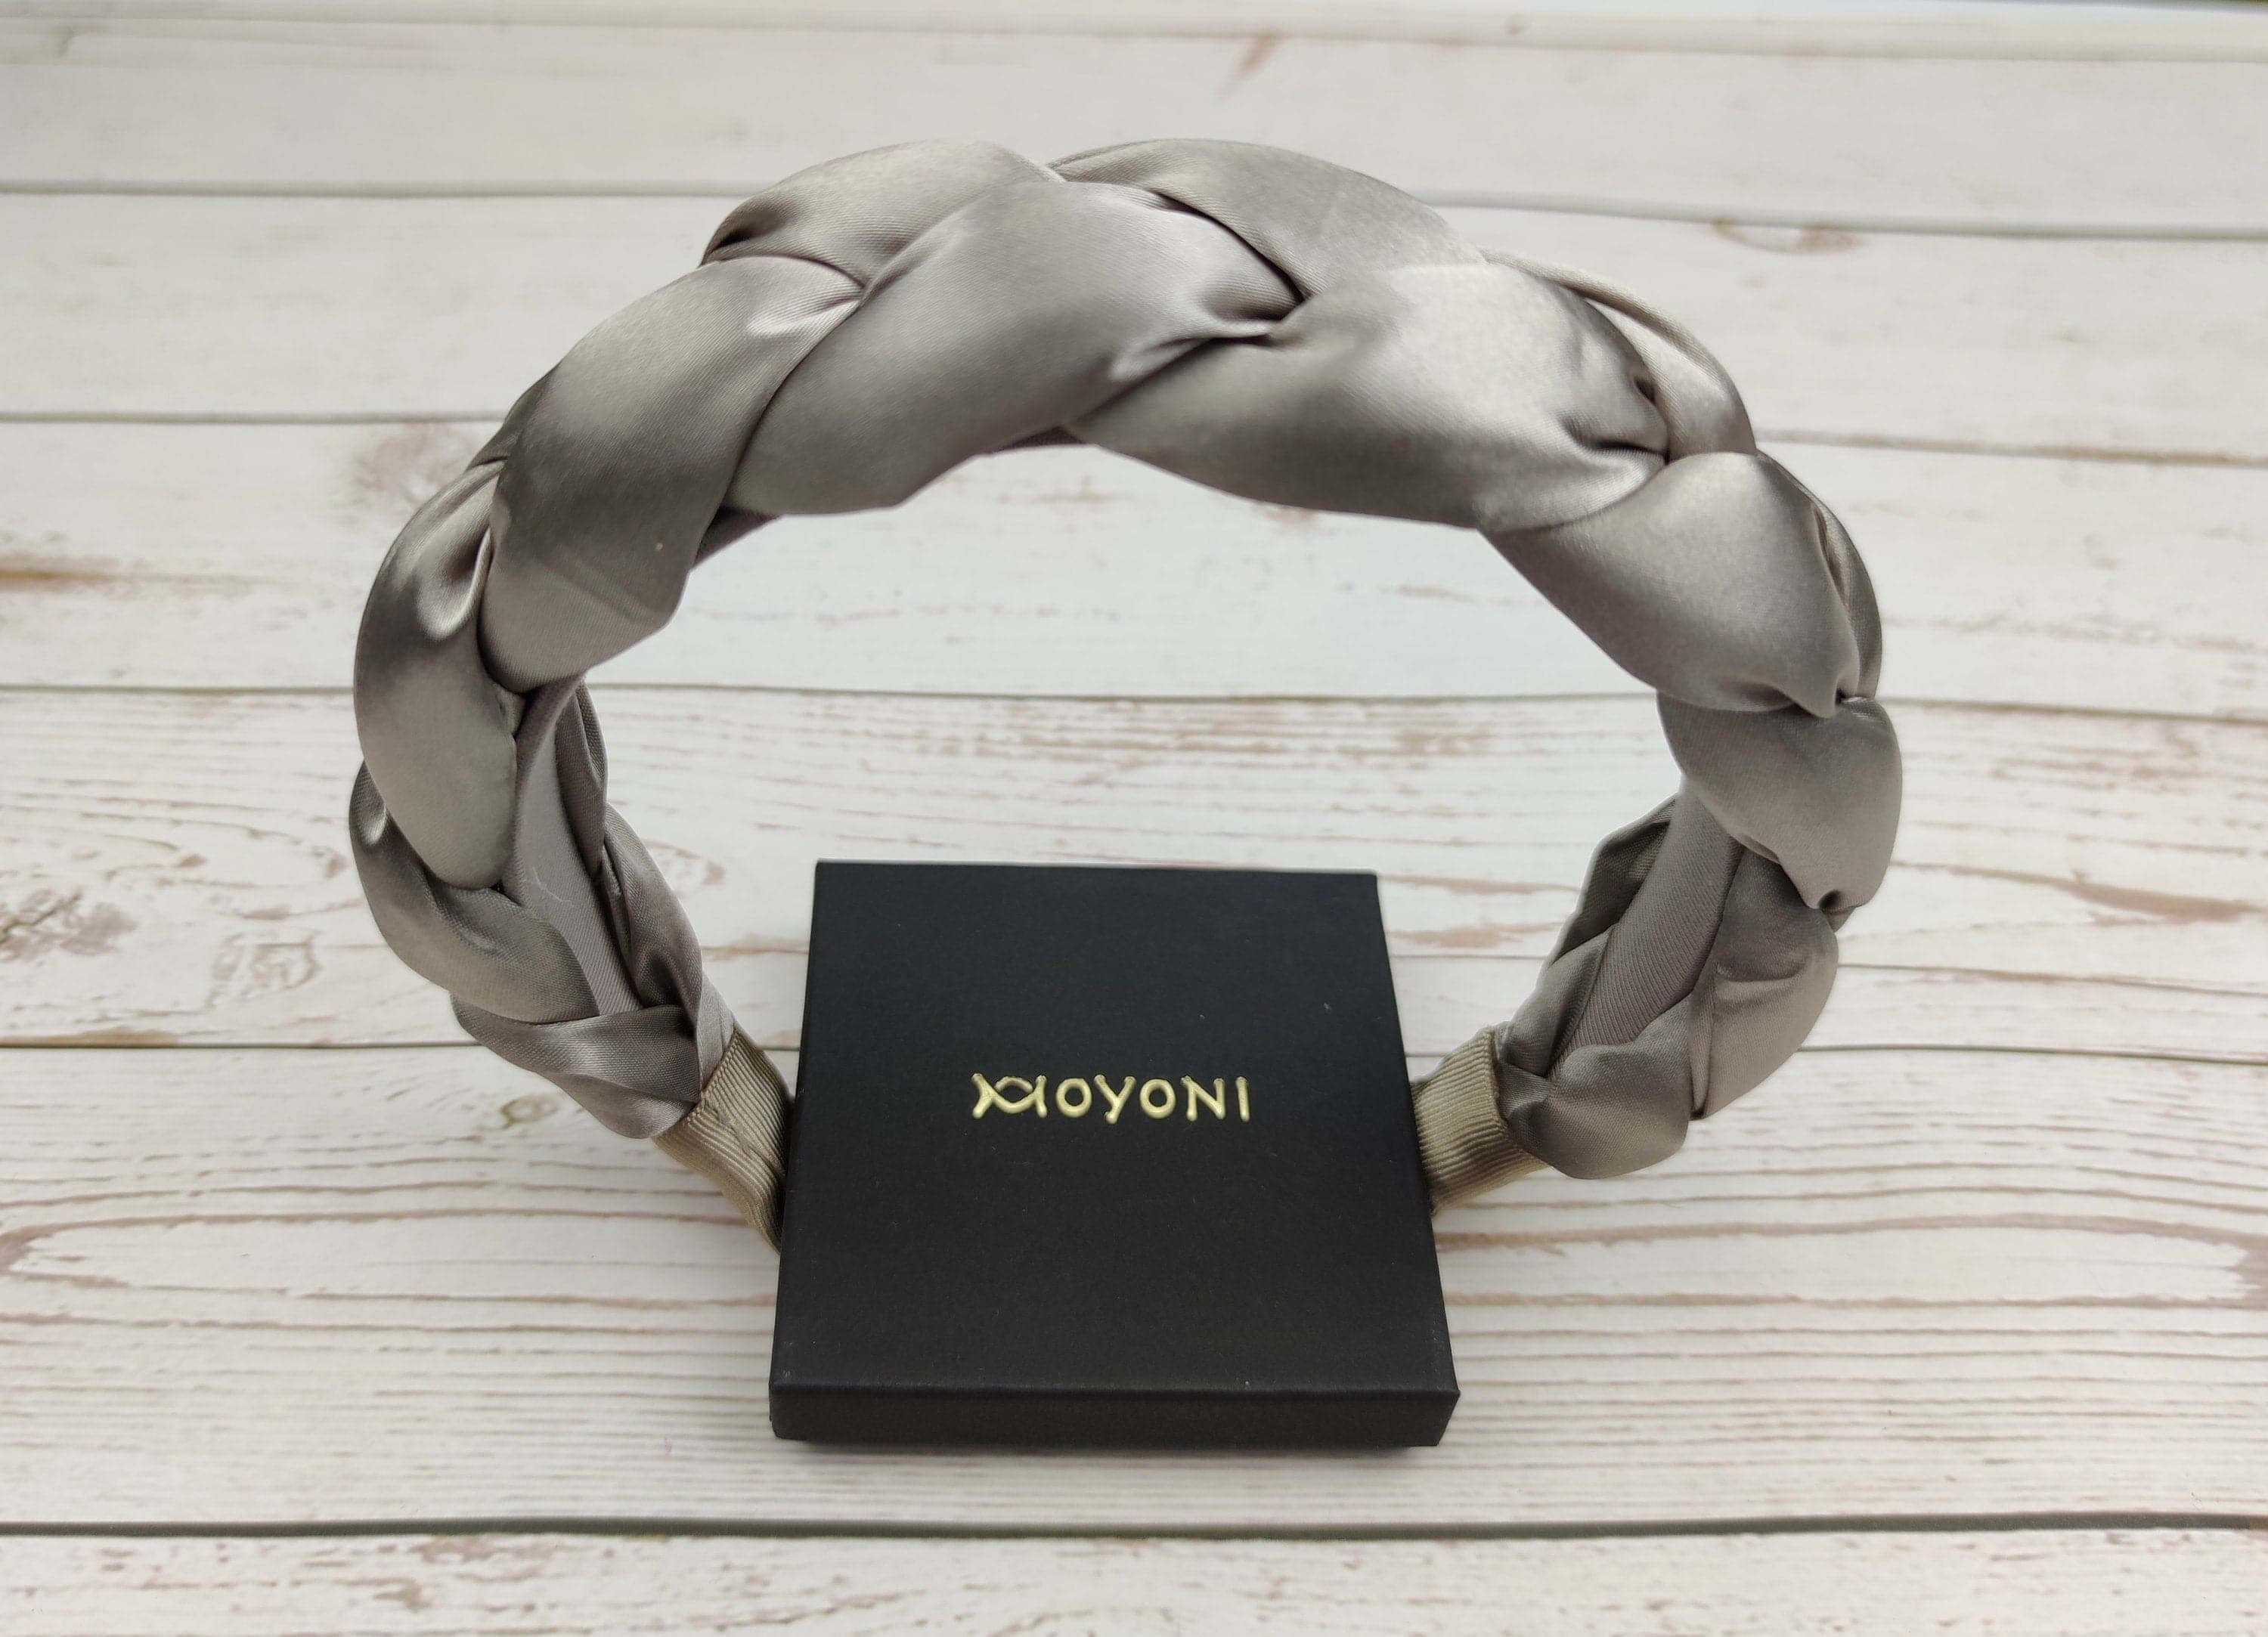 Light up your fashion style with these beige satin headbands. Made from soft and luxurious satin material, these headbands are sure to make a statement. Add a little luxury to any outfit with this stylish headband.